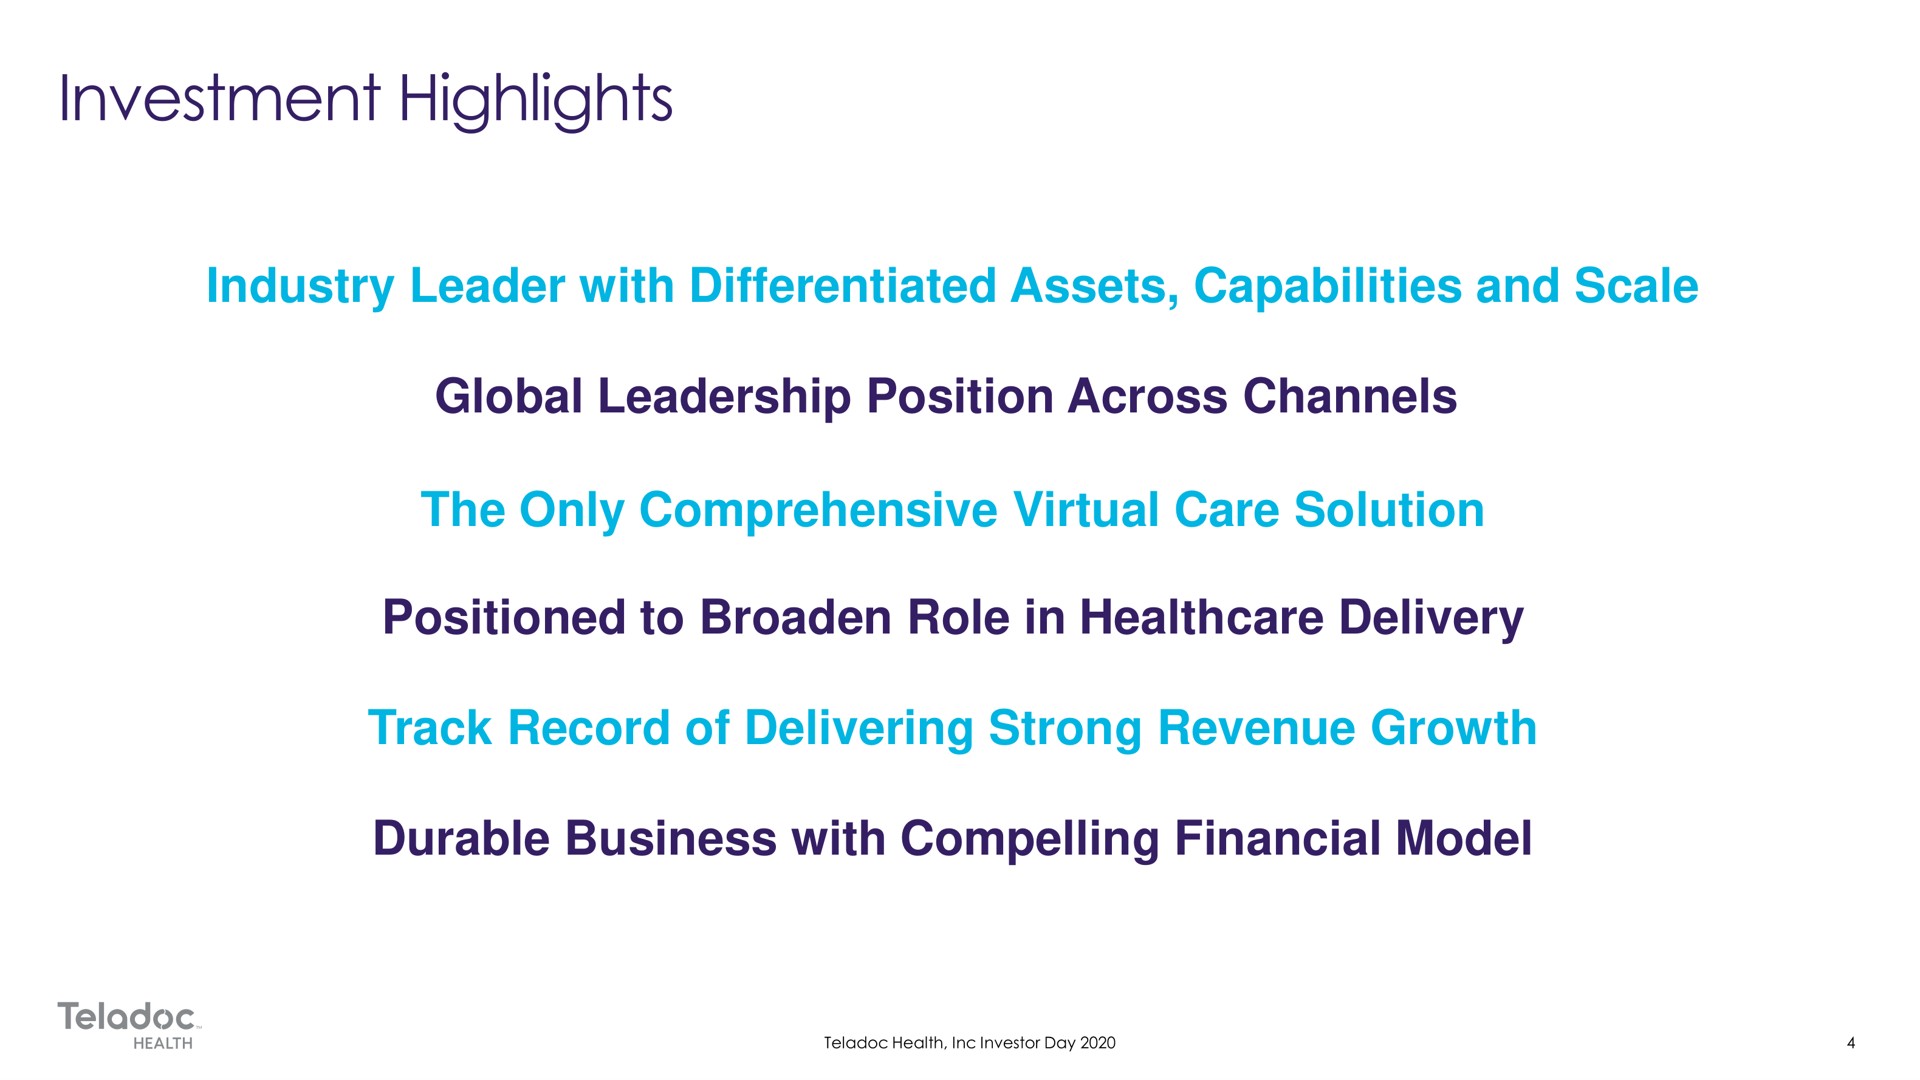 industry leader with differentiated assets capabilities and scale global leadership position across channels the only comprehensive virtual care solution positioned to broaden role in delivery track record of delivering strong revenue growth durable business with compelling financial model investment highlights | Teladoc